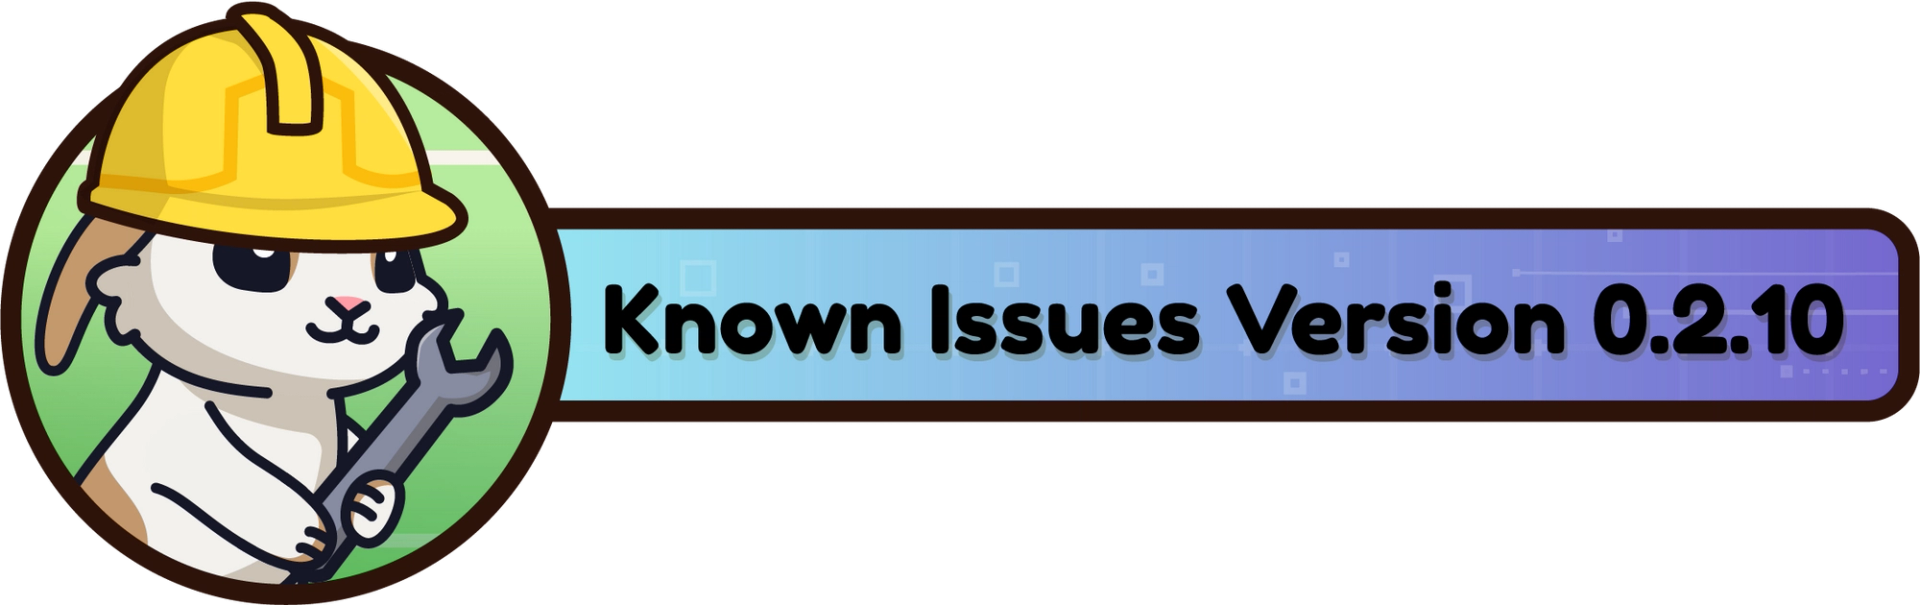 Known Issues Version 0.2.10